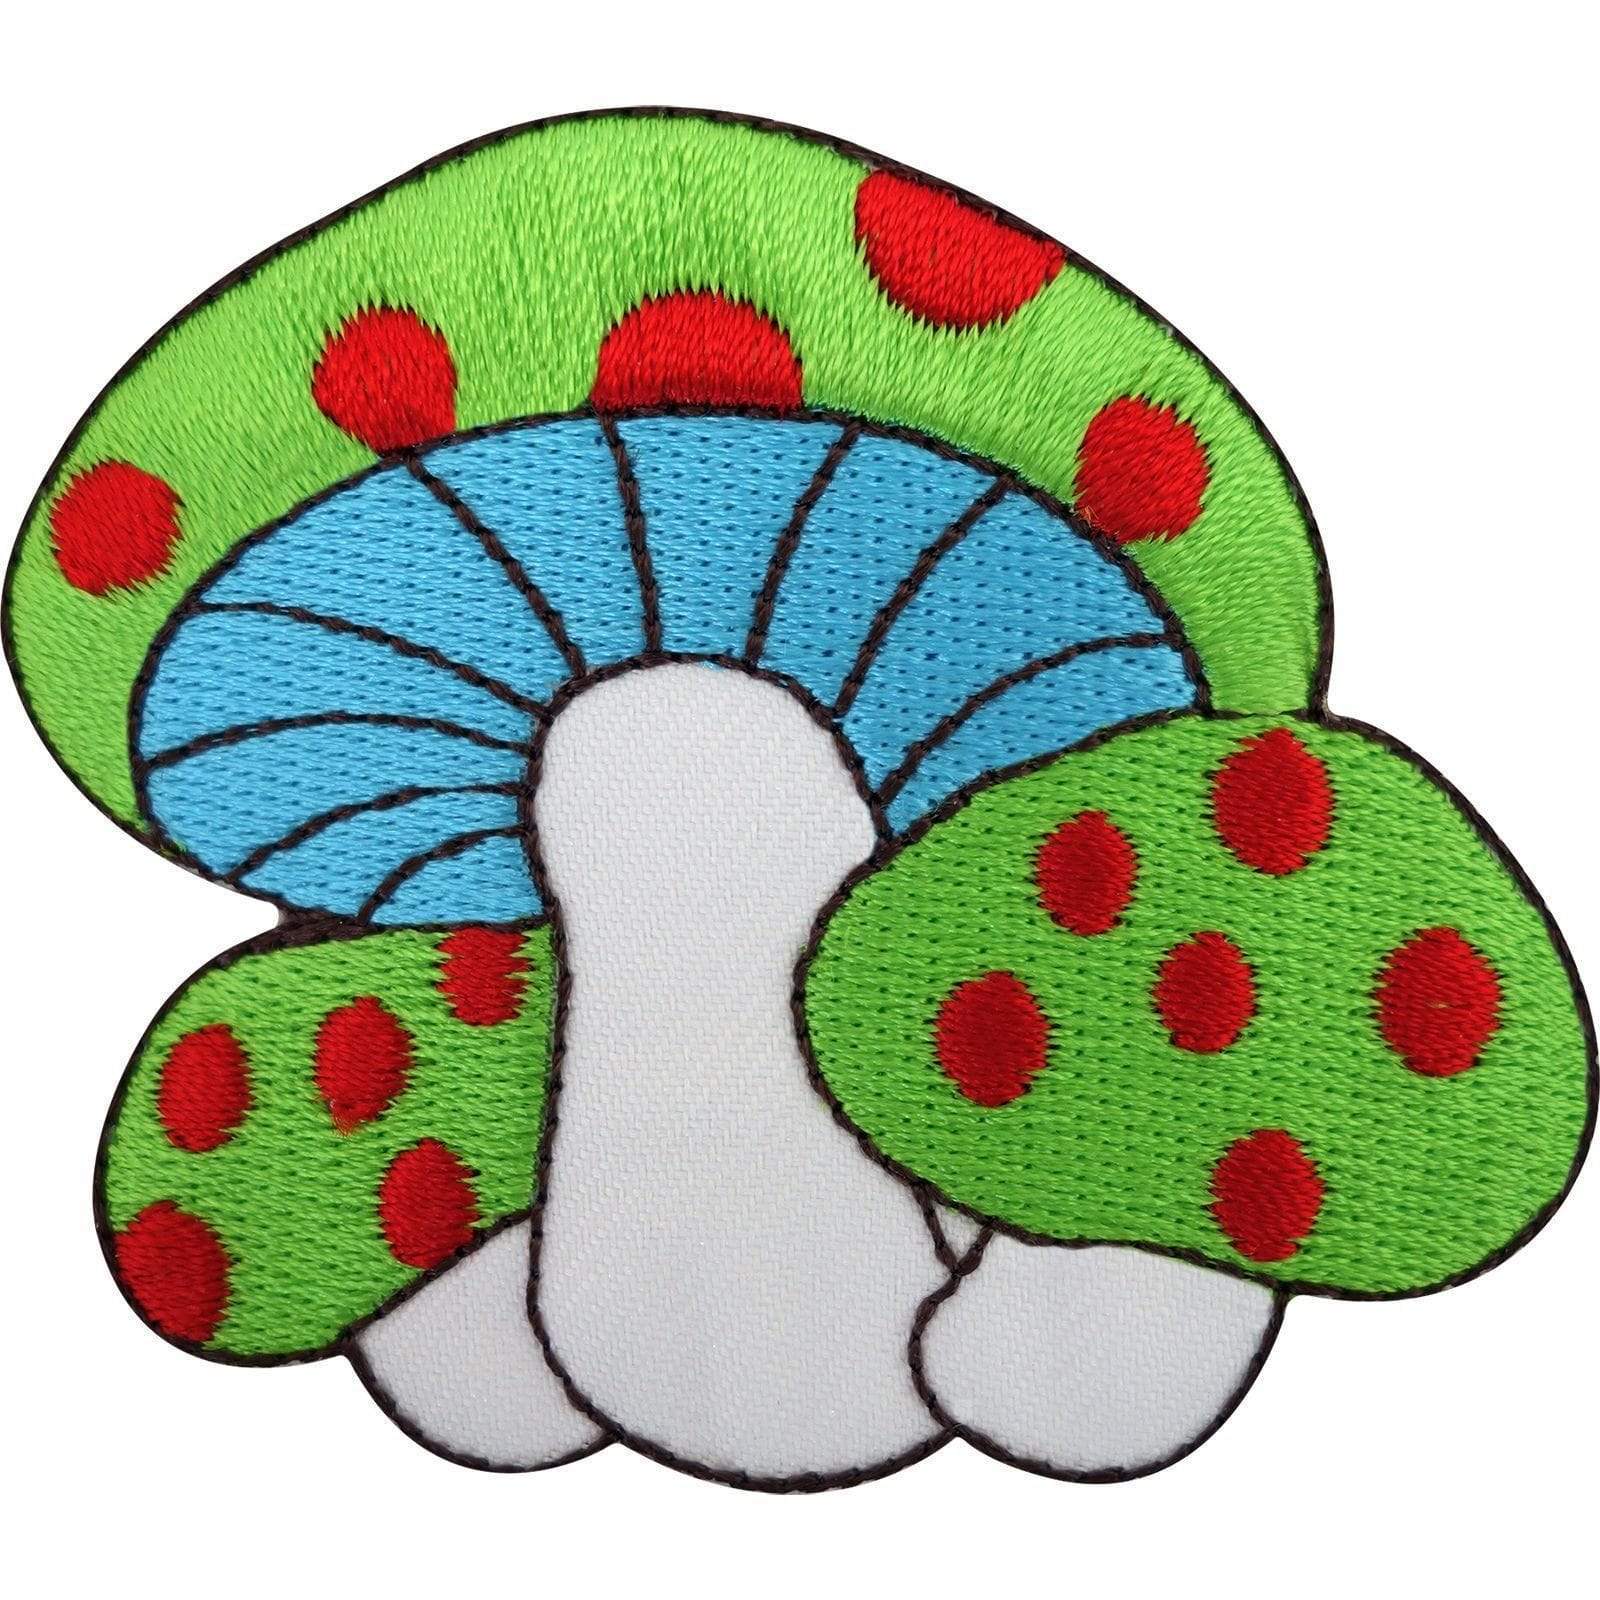 Magic Mushroom Badge Embroidered Sew / Iron On Patch for T Shirt Bag Jeans Craft